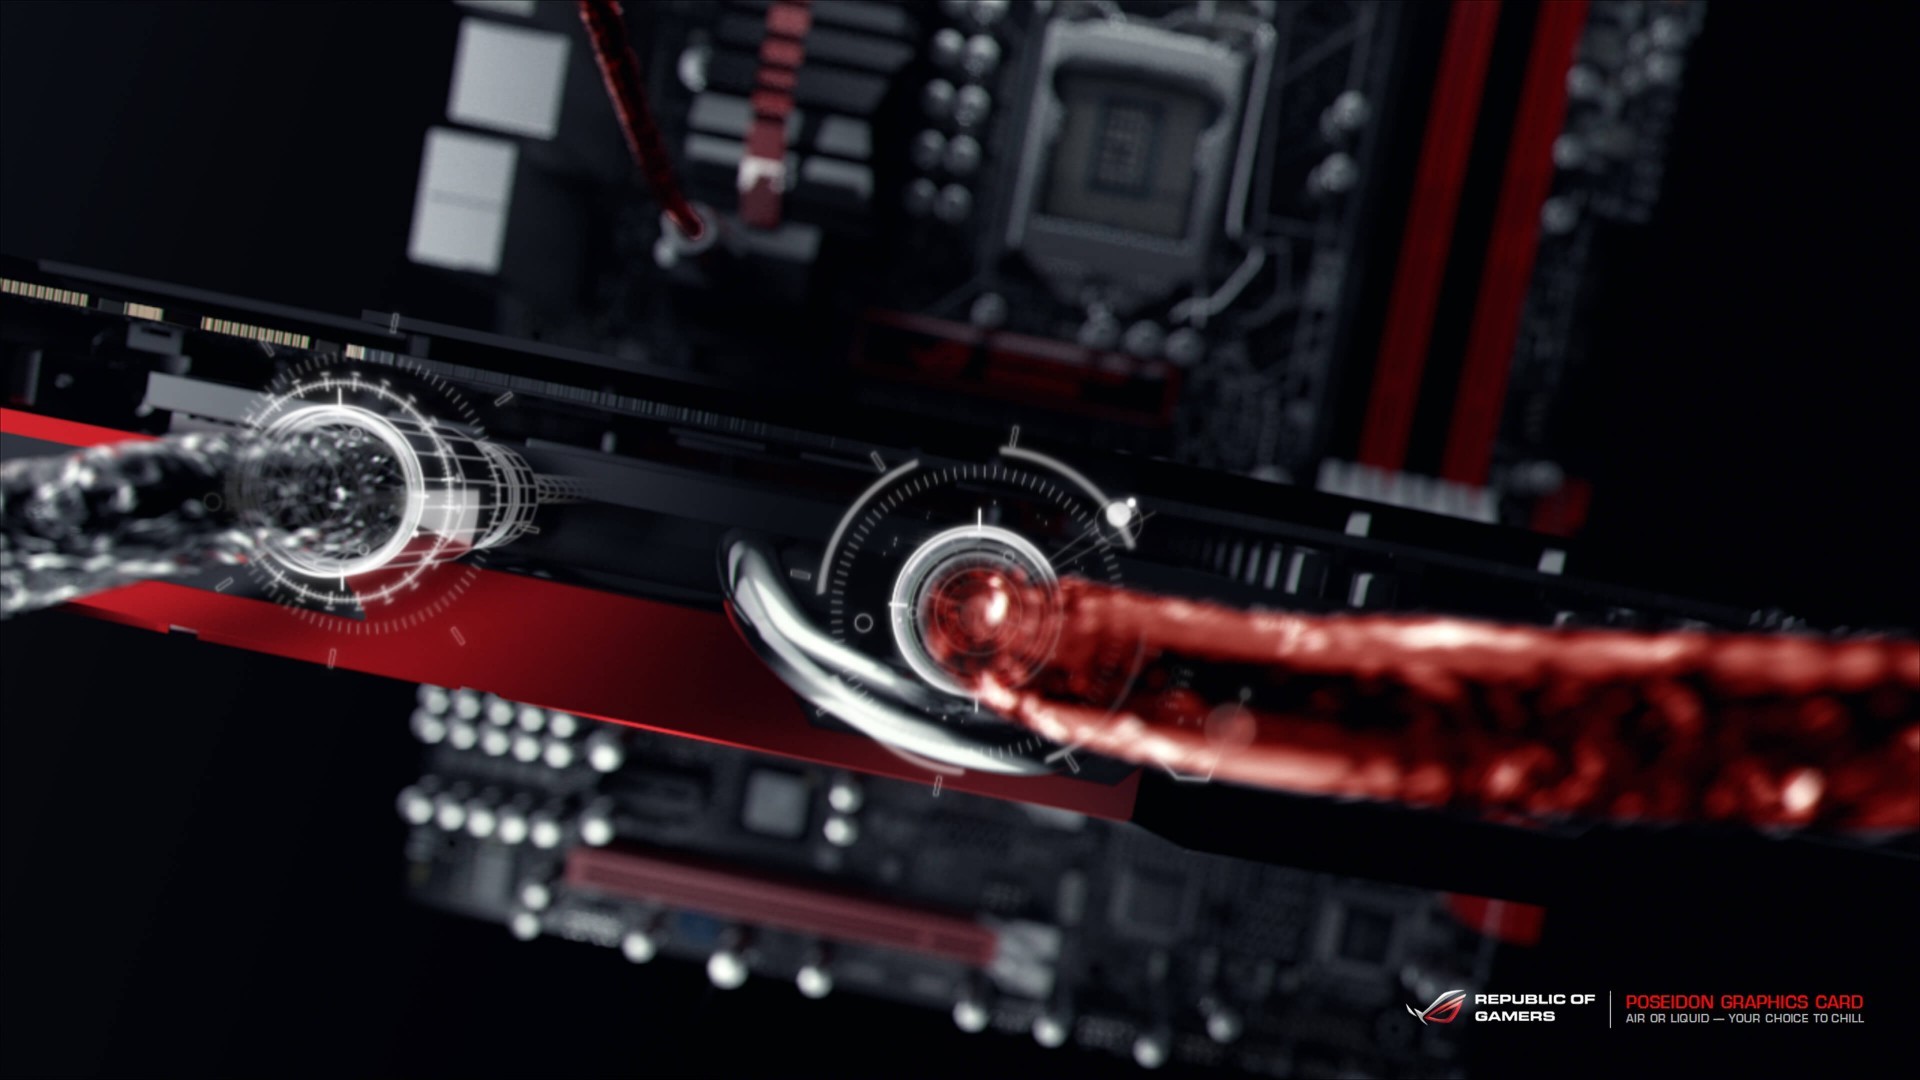 ASUS, ASUS ROG, Cooling Fan, Technology, PC Gaming wallpaper | brands and  logos | Wallpaper Better